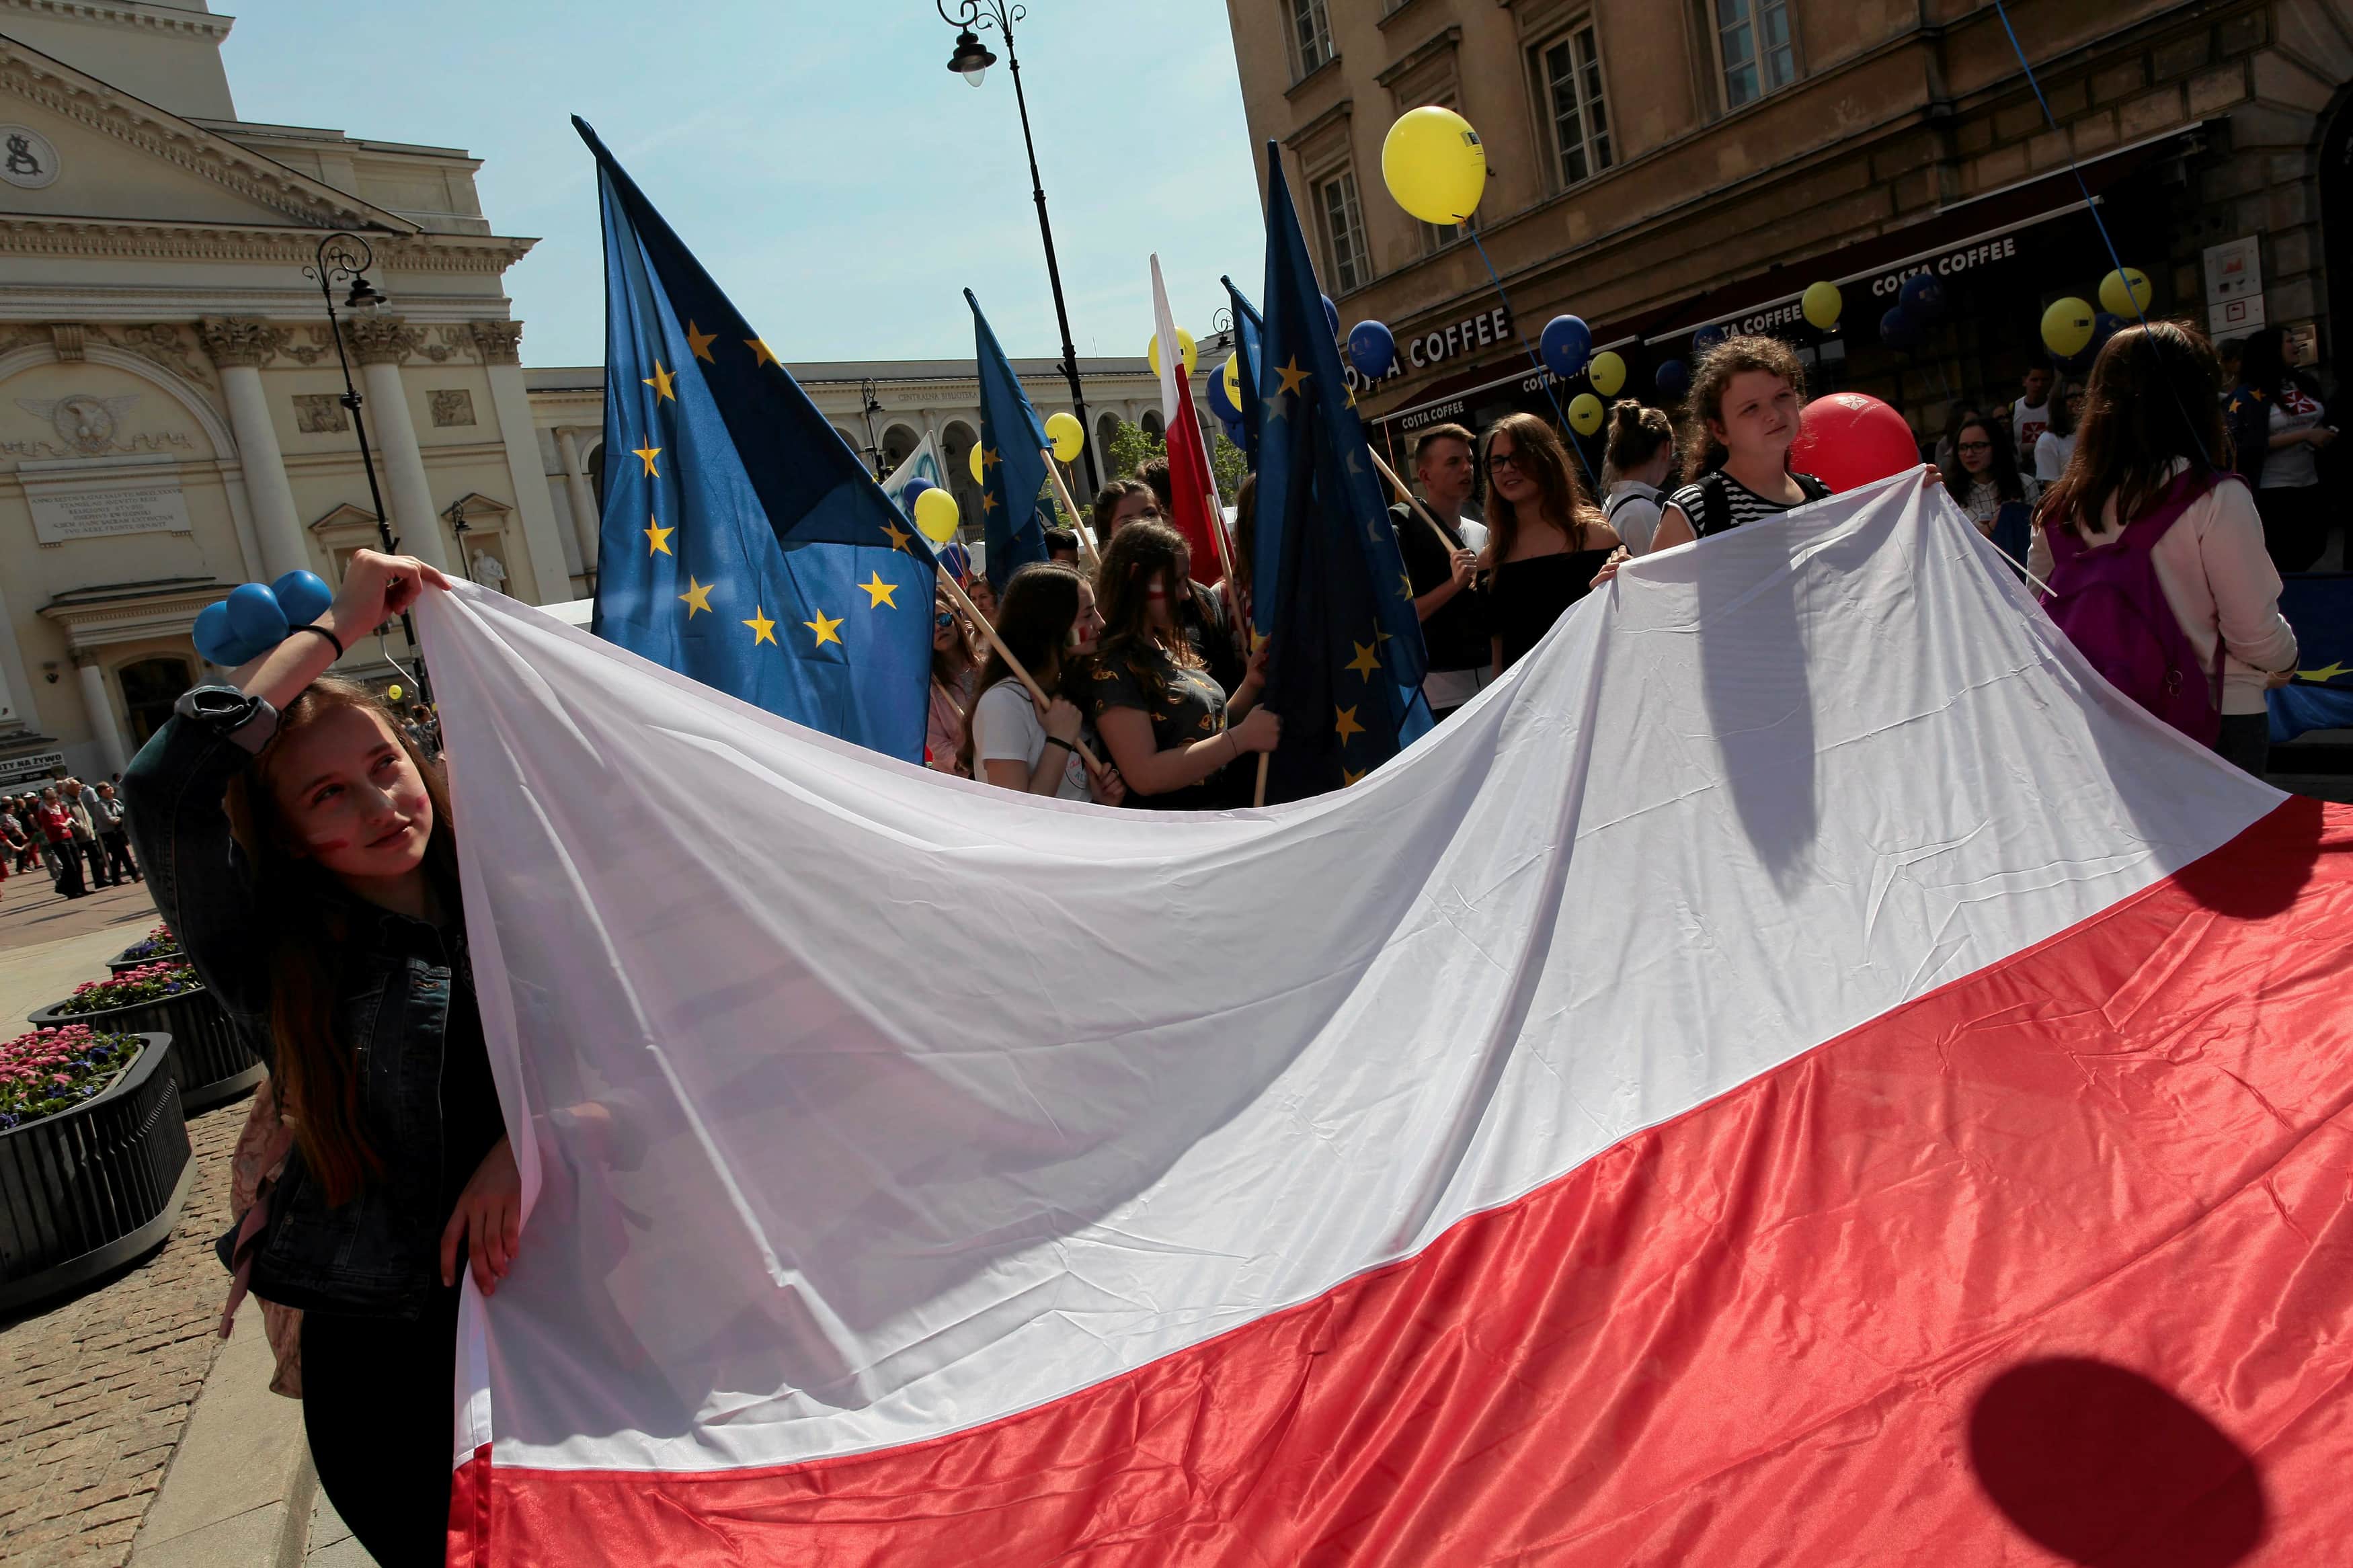 People hold European Union and Polish flags during the annual EU parade in Warsaw, Poland, 6 May 2017, Agencja Gazeta/Dawid Zuchowicz via REUTERS